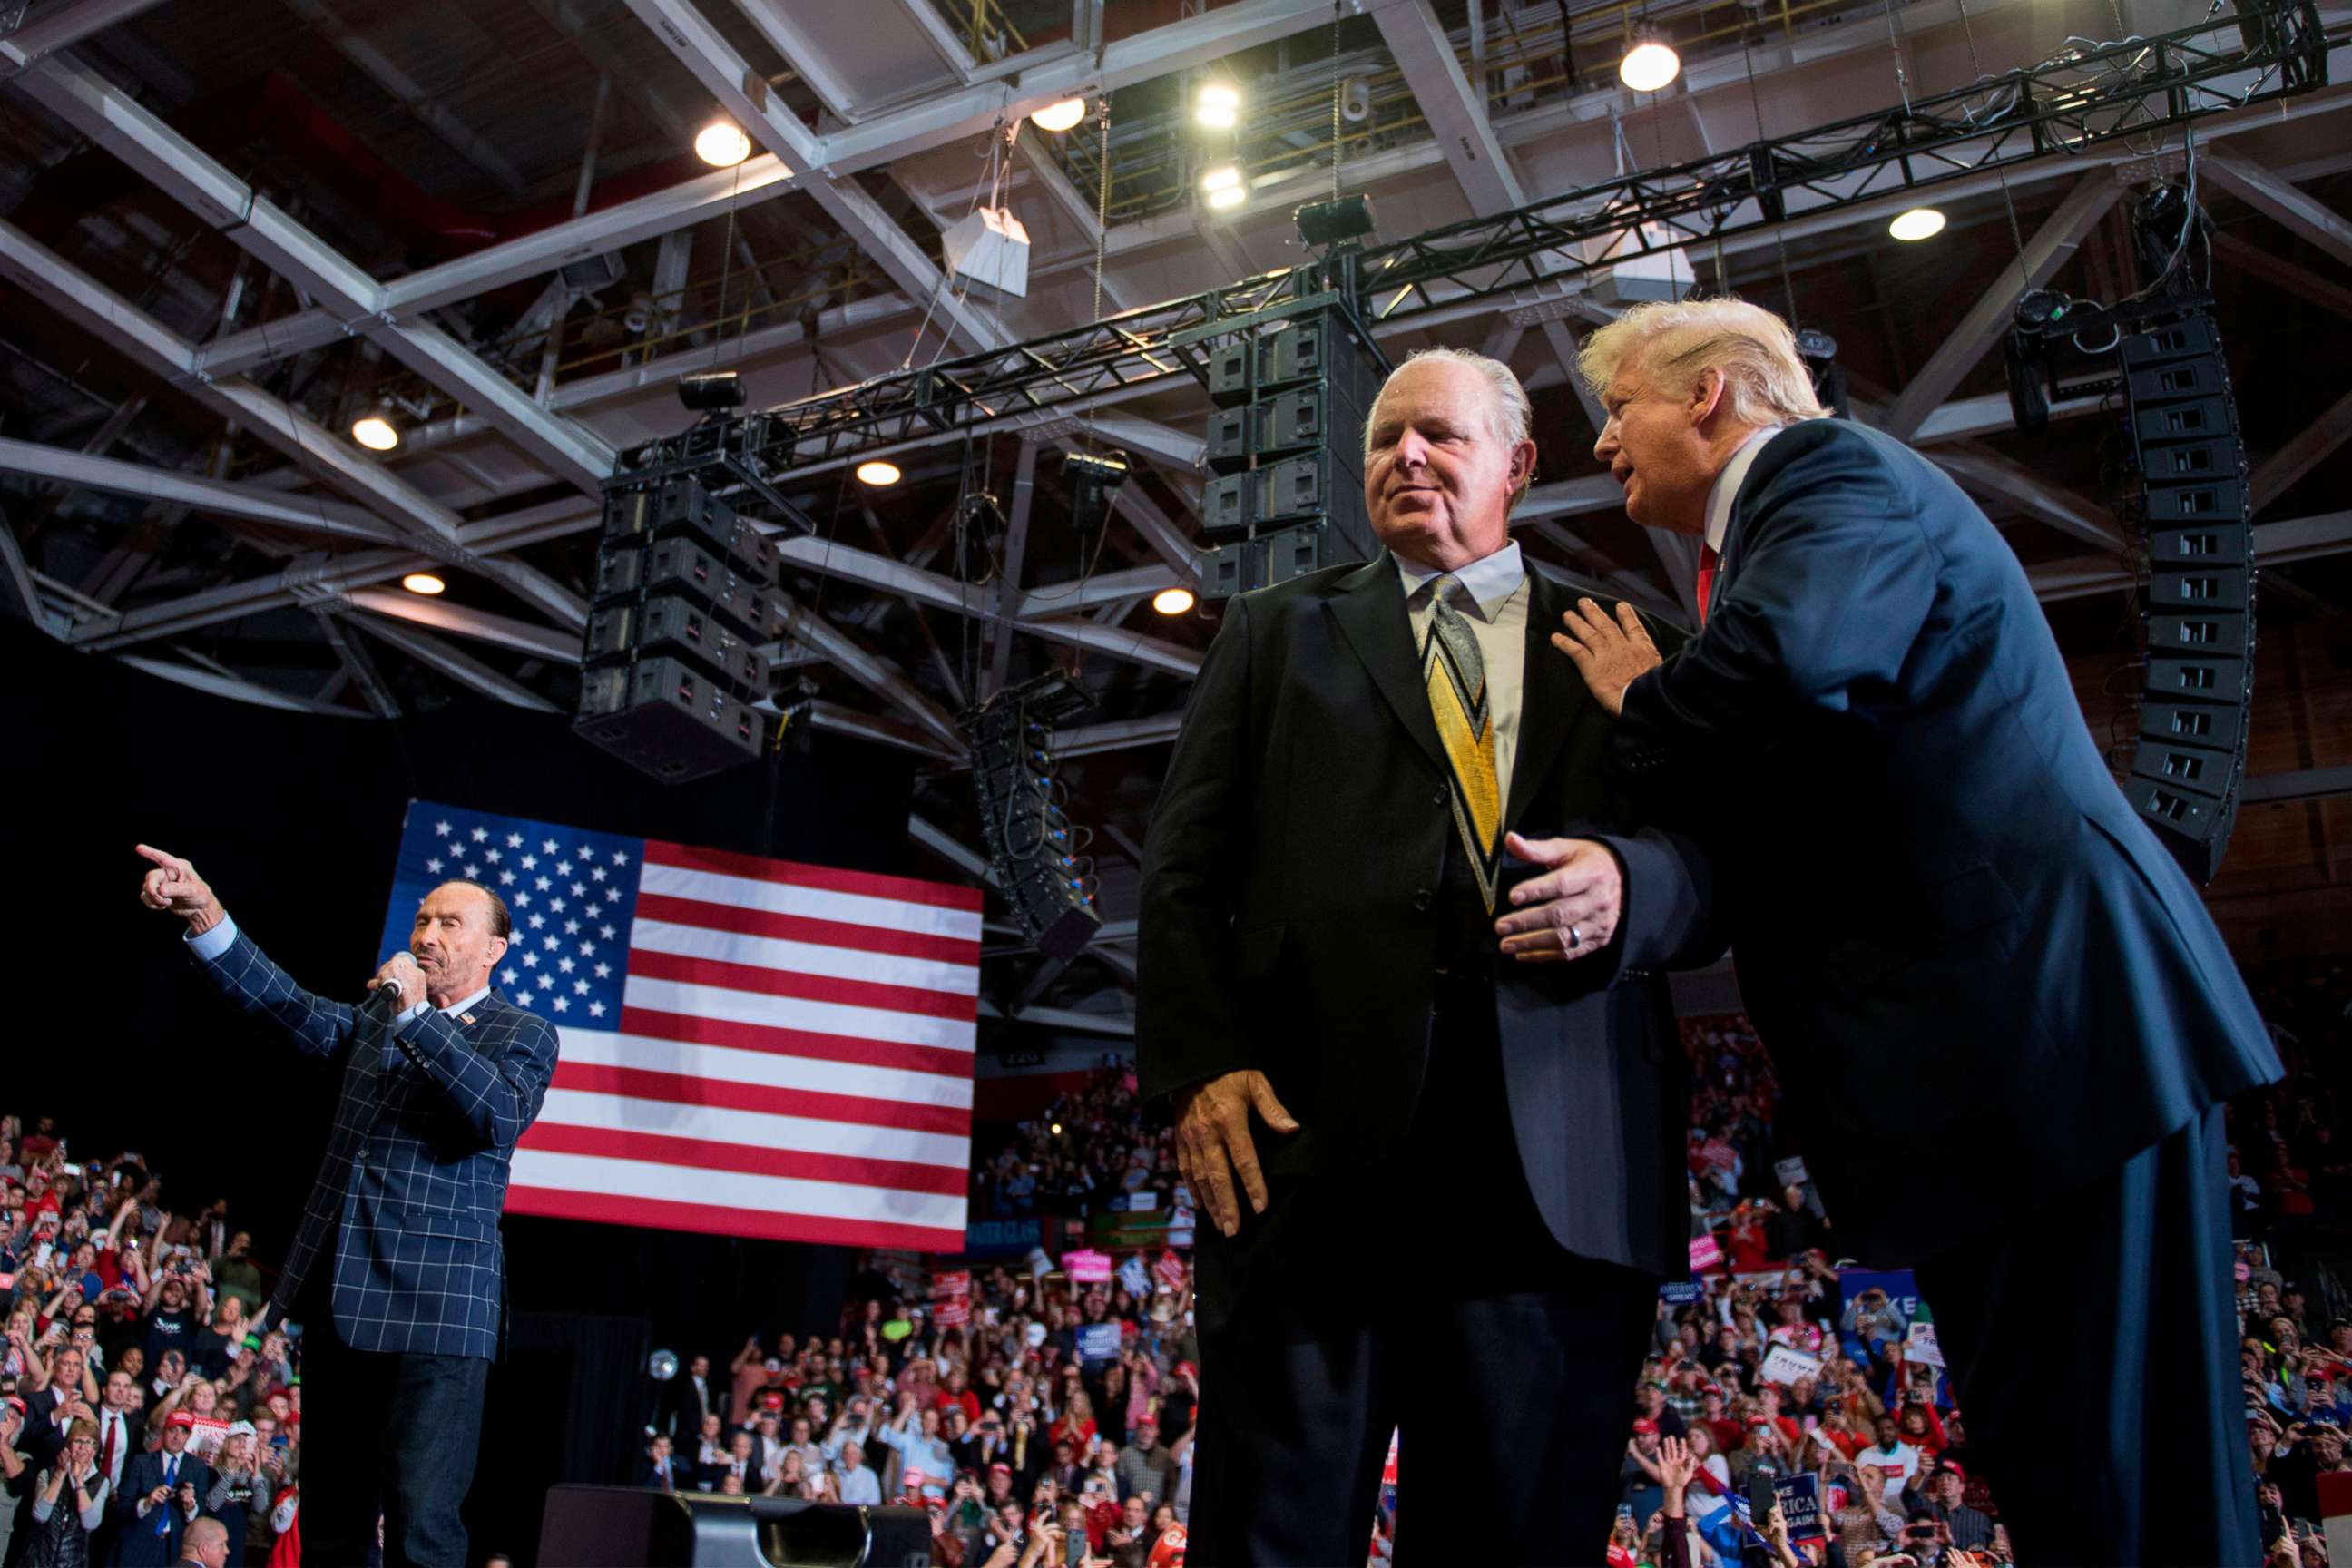 PHOTO: President Donald Trump speaks to radio talk show host Rush Limbaugh, while Lee Greenwood performs "God Bless The USA", at a Make America Great Again rally in Cape Girardeau, Mo., Nov. 5, 2018. 